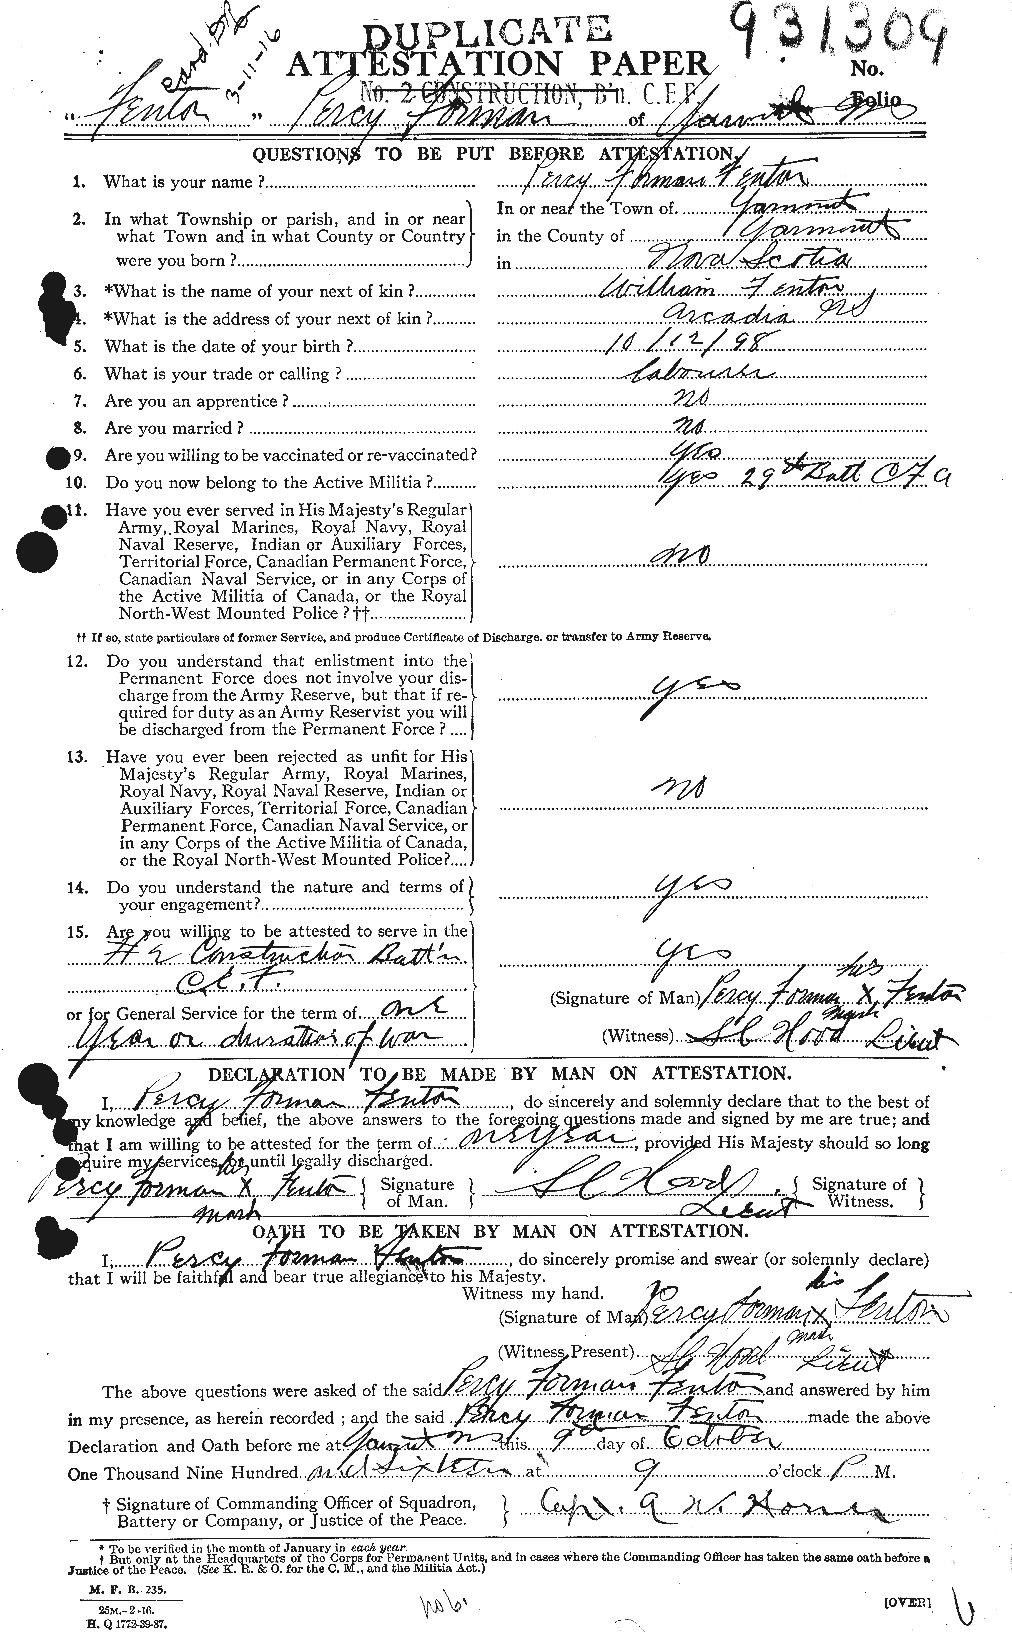 Personnel Records of the First World War - CEF 318539a